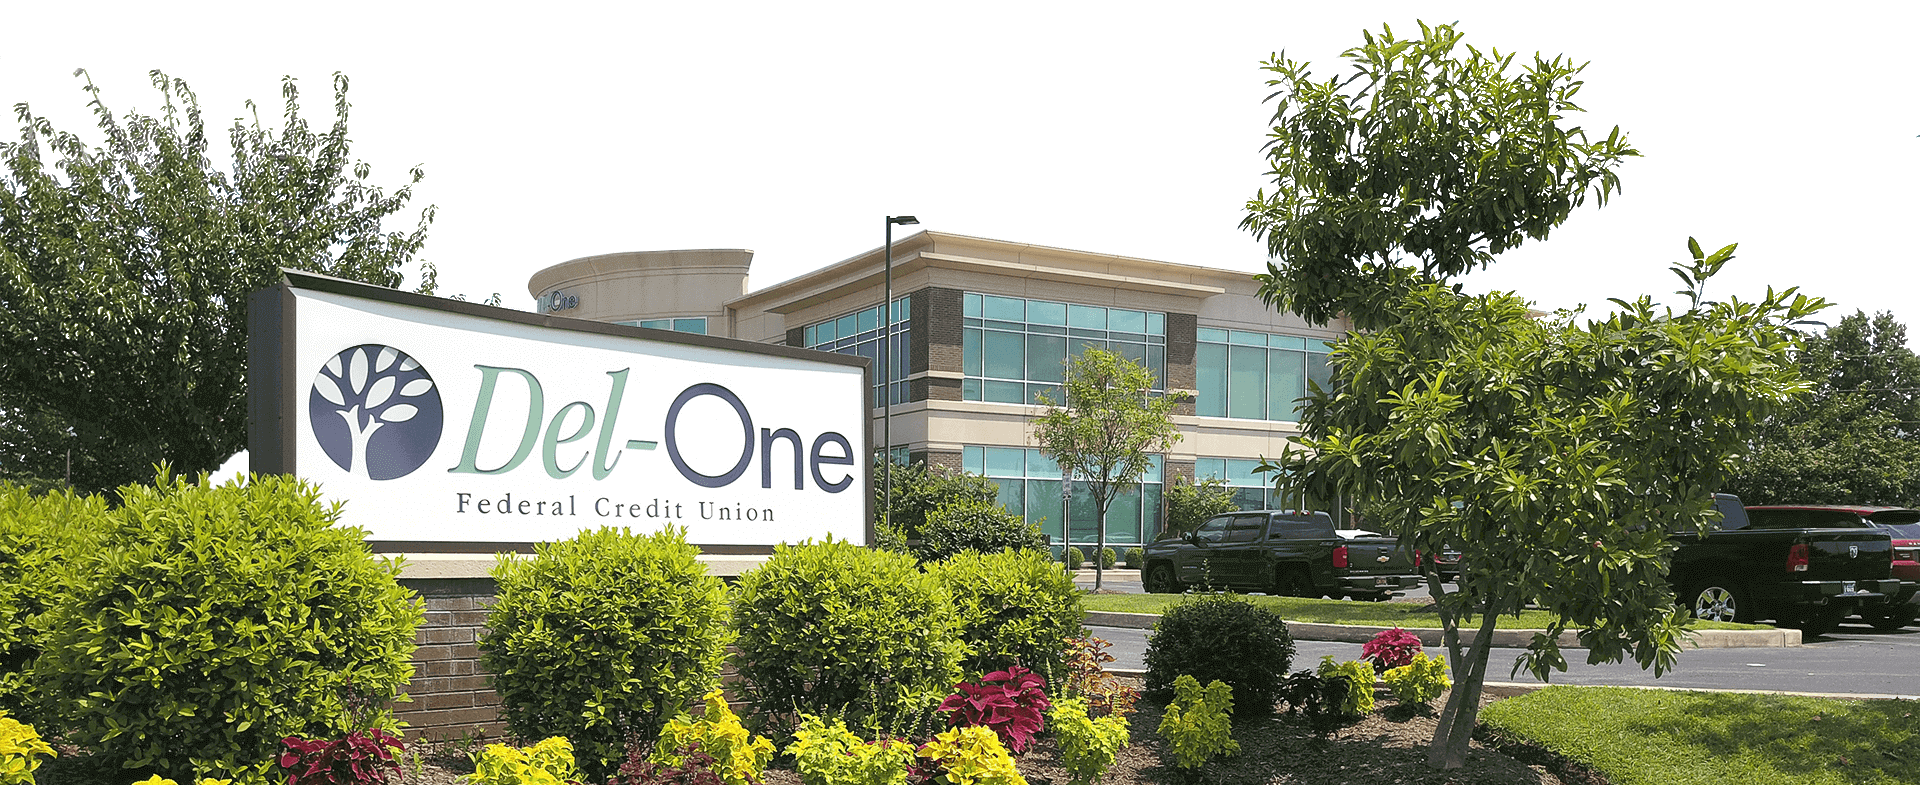 Image of an outdoor banner of Del-One FCU